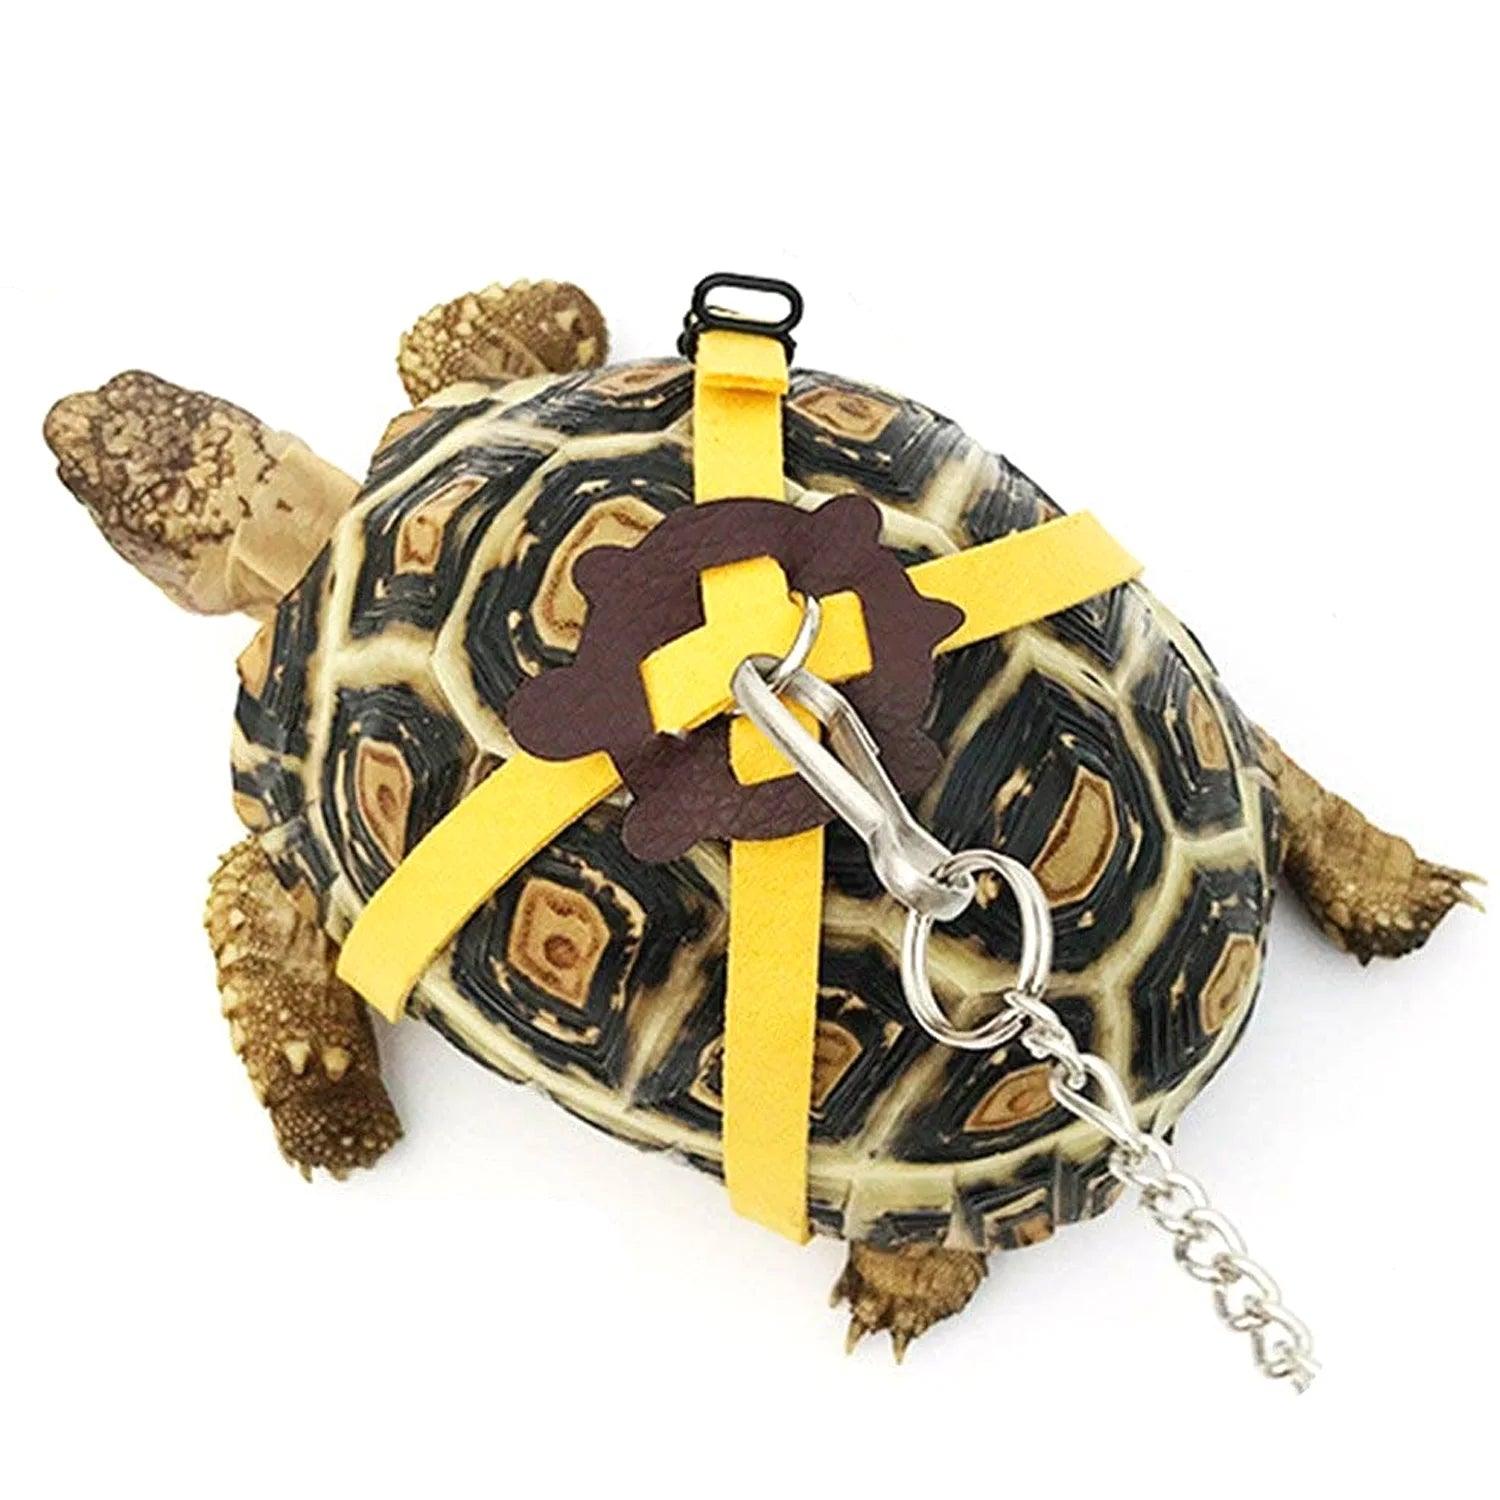 Pet Tortoise Turtle Leather Harness Strap Adjustable Turtle Lizard Strap Collar Walking Leash Control Rope - Ammpoure Wellbeing